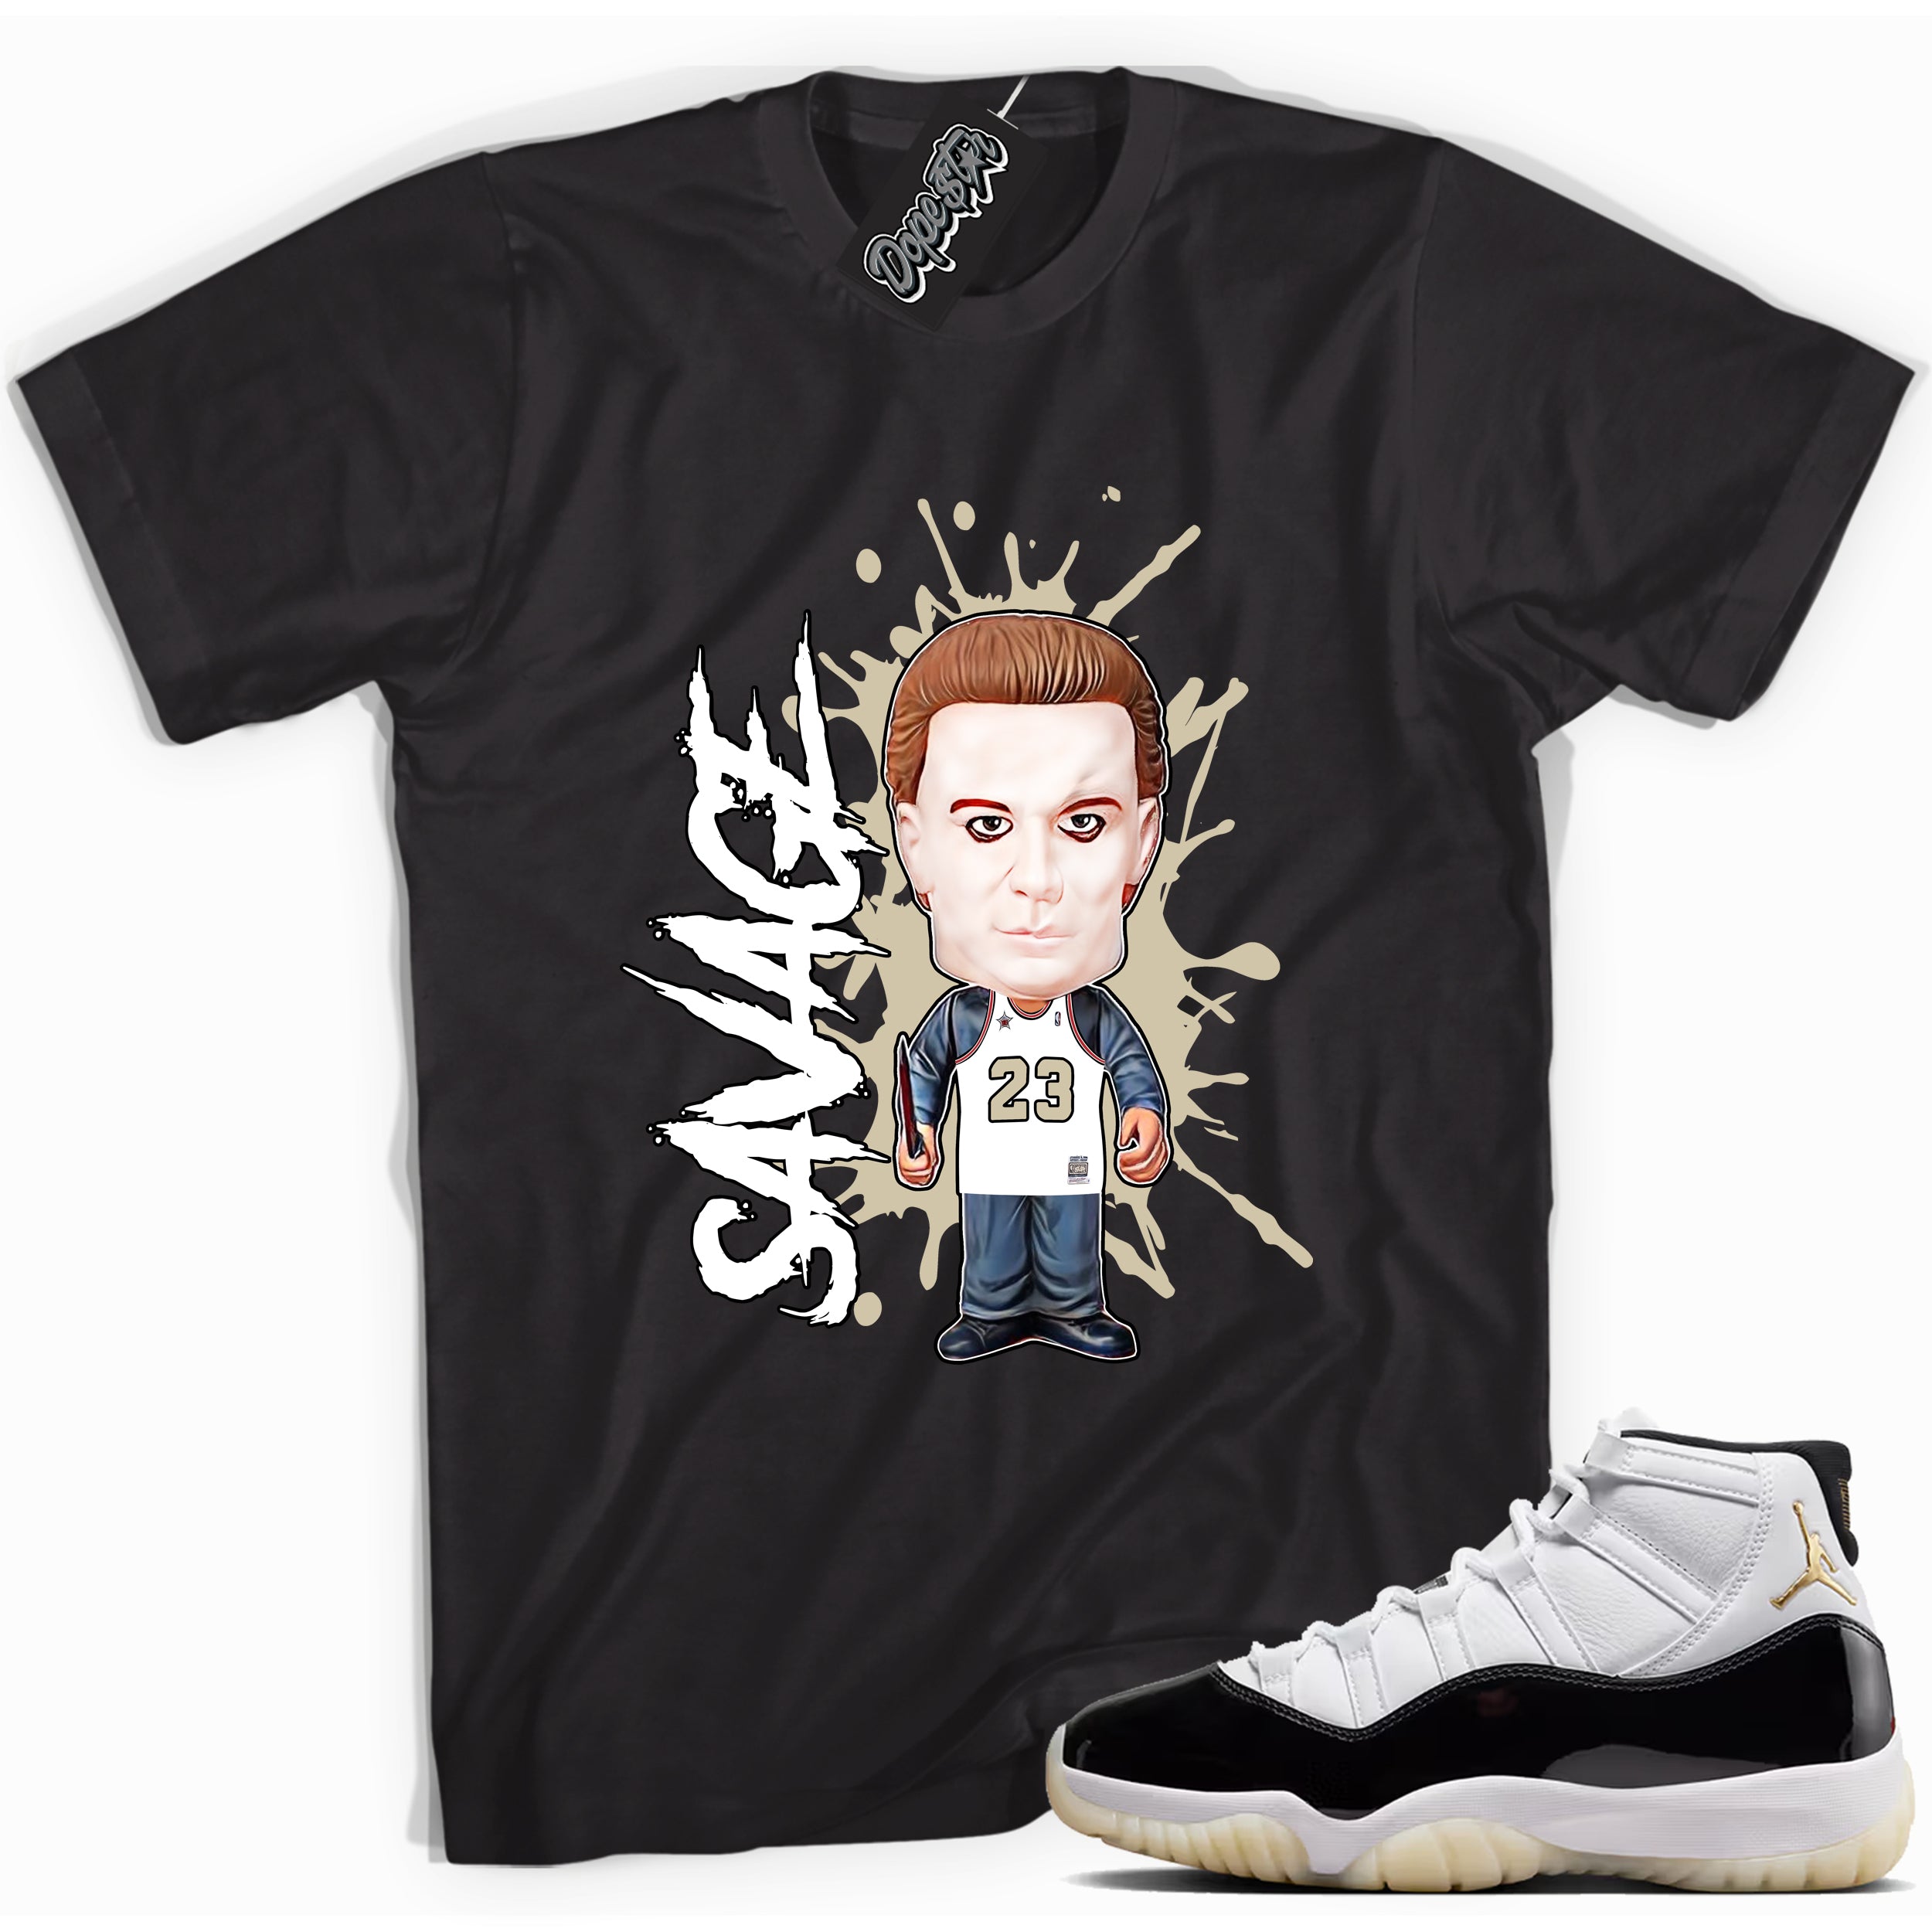 Cool Black graphic tee with “ Savage ” print, that perfectly matches AIR JORDAN 11 GRATITUDE  sneakers